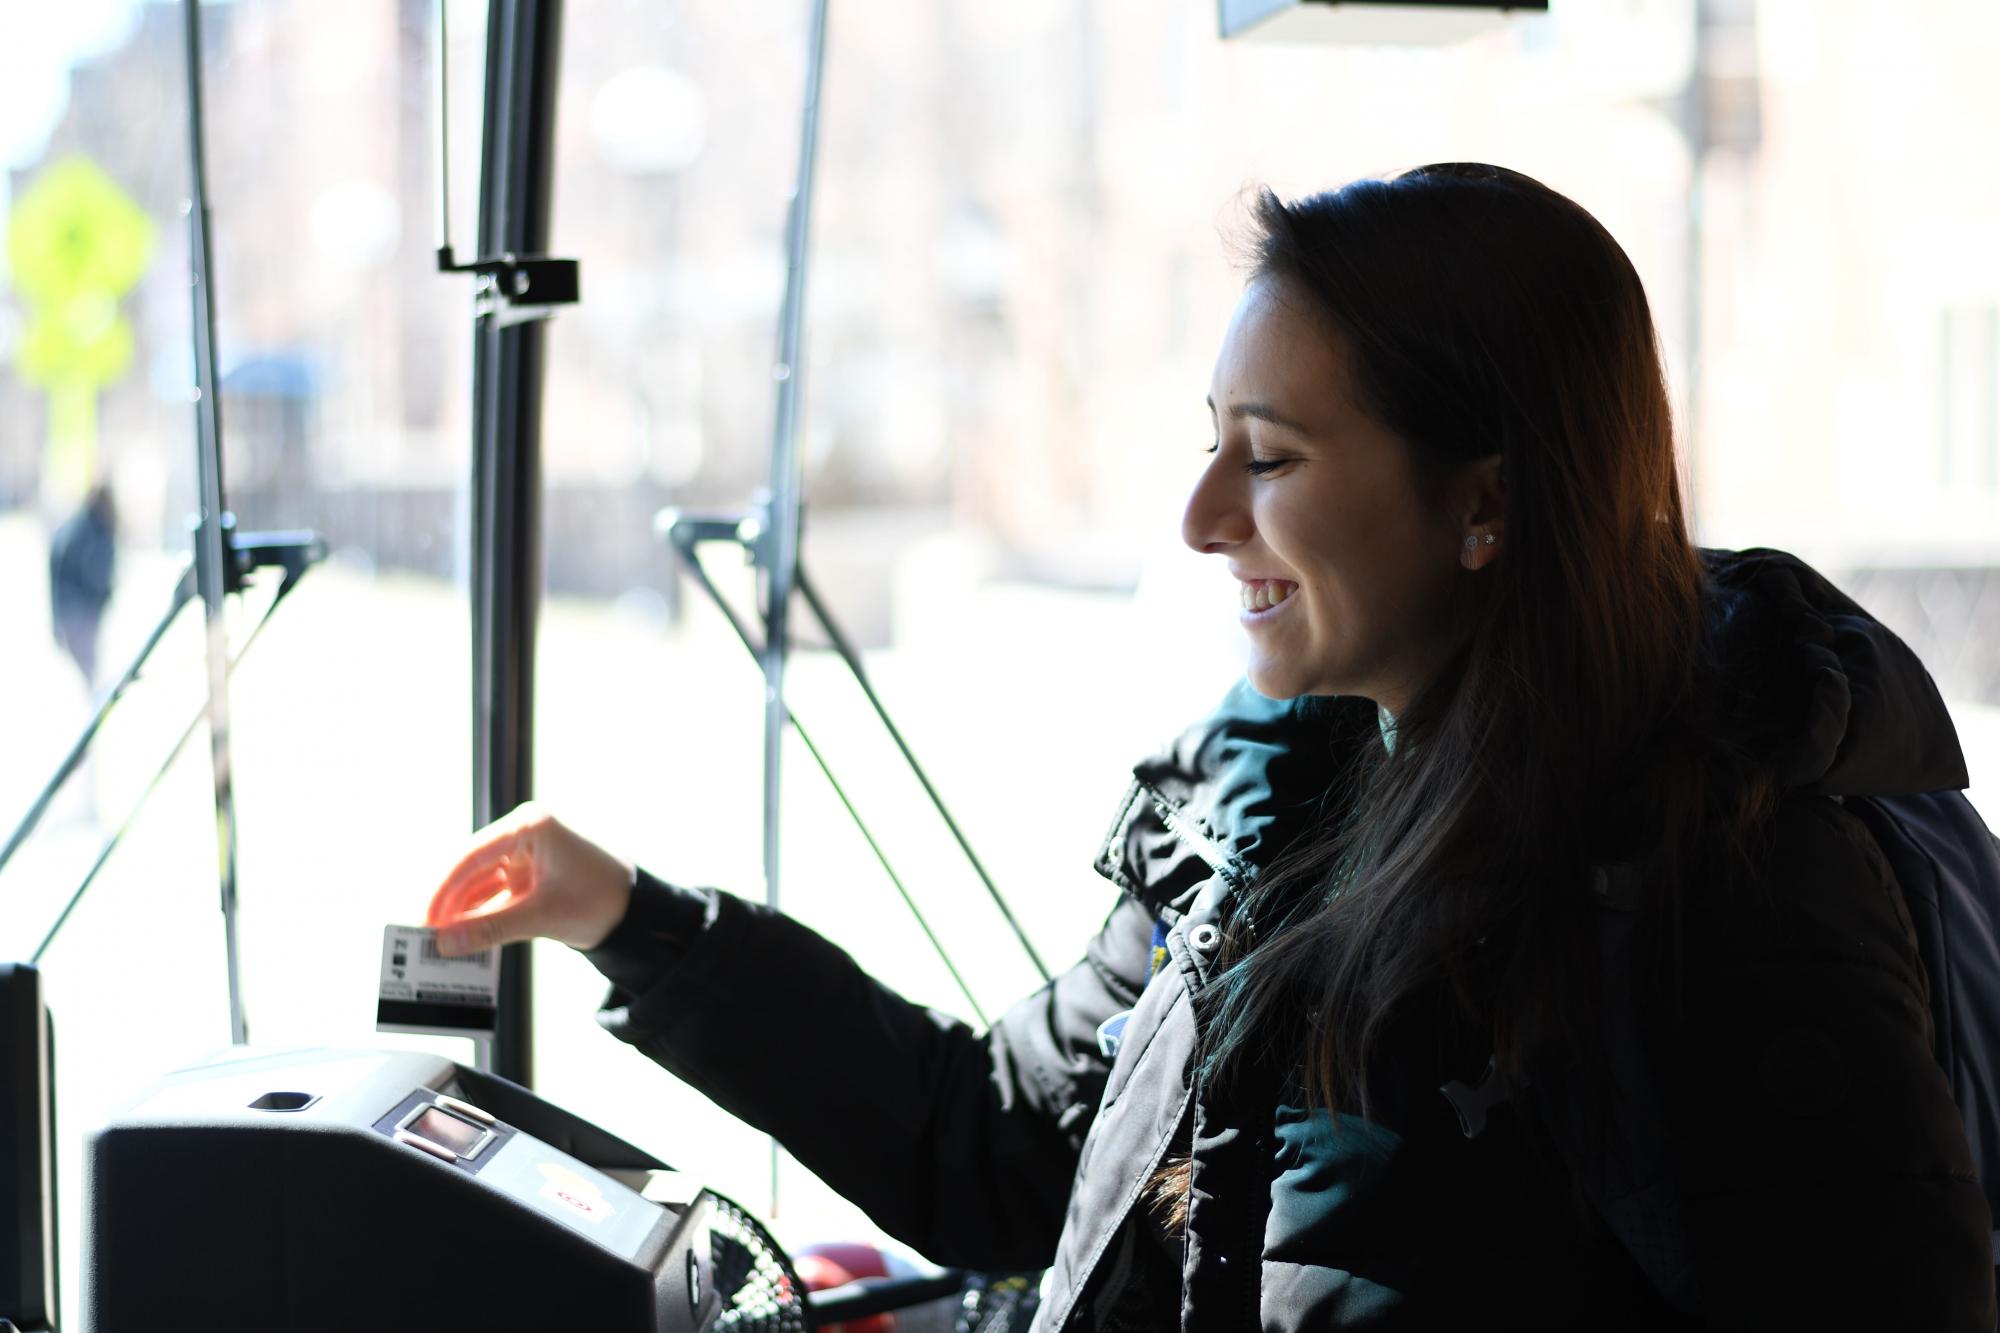 A woman swipes her bus pass as she enters the bus.